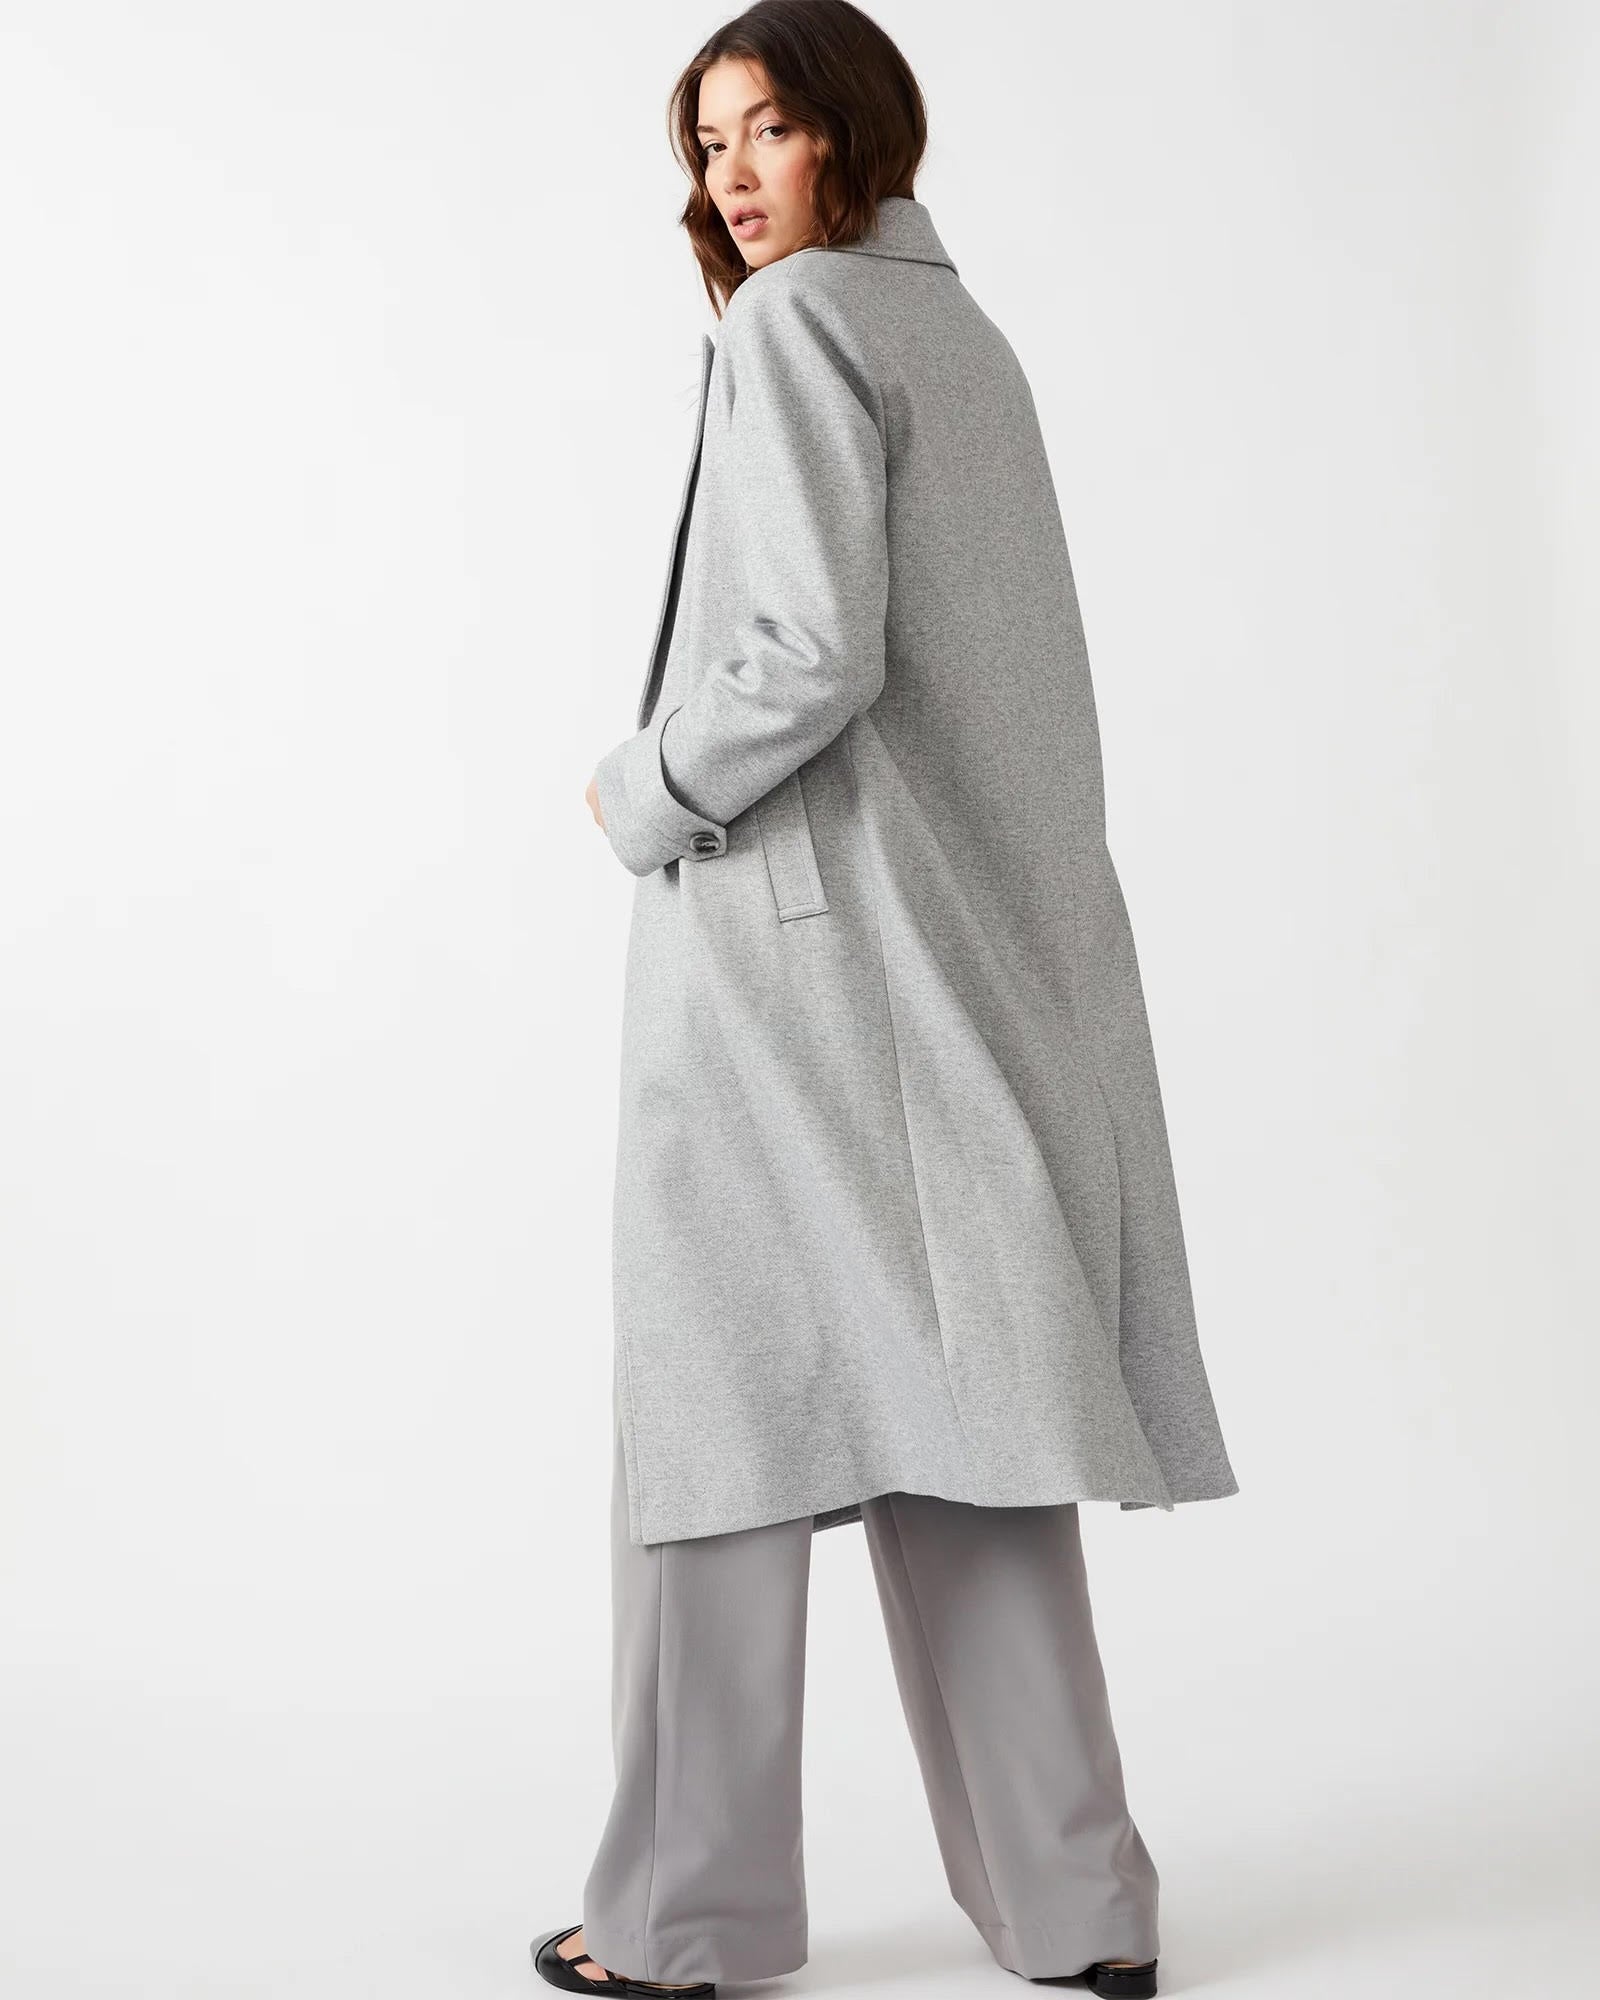 Light Gray Trench Coat - Final Sale